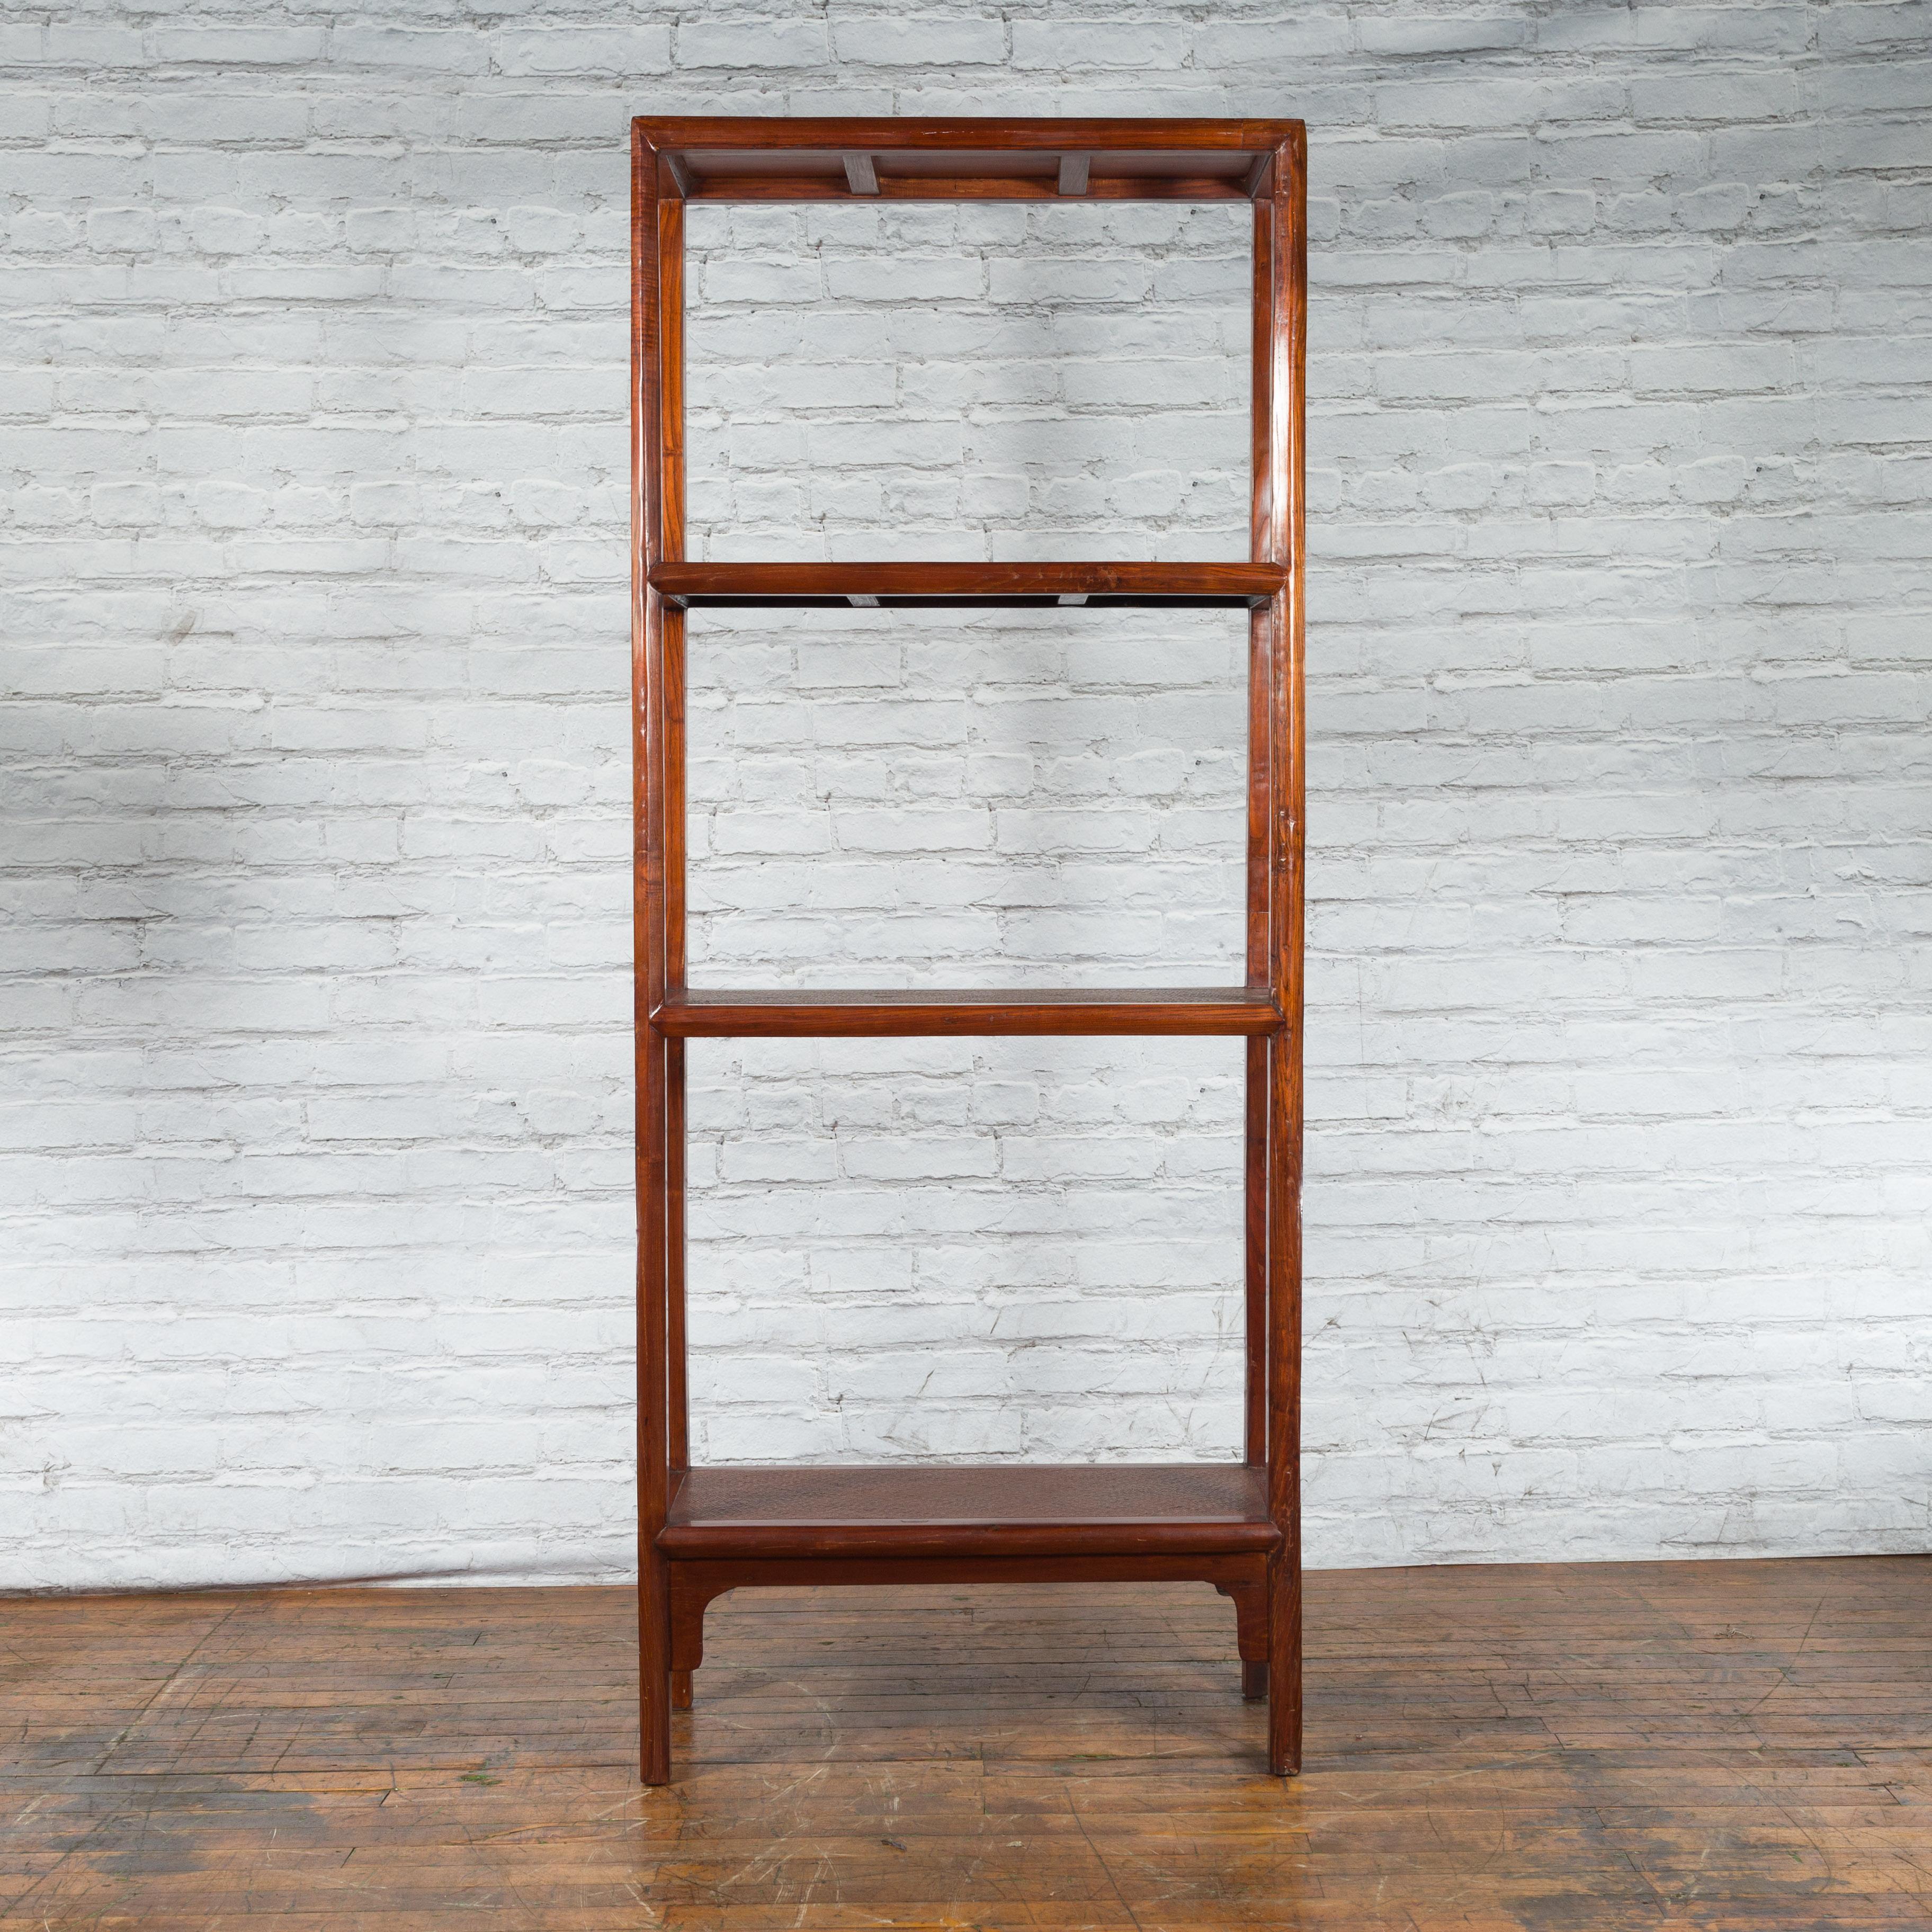 A Chinese elm wood bookshelf from the early 20th century with rattan shelves and carved apron. Created in China during the early years of the 20th century, this elm wood bookshelf features an open structure made of three shelves presenting woven